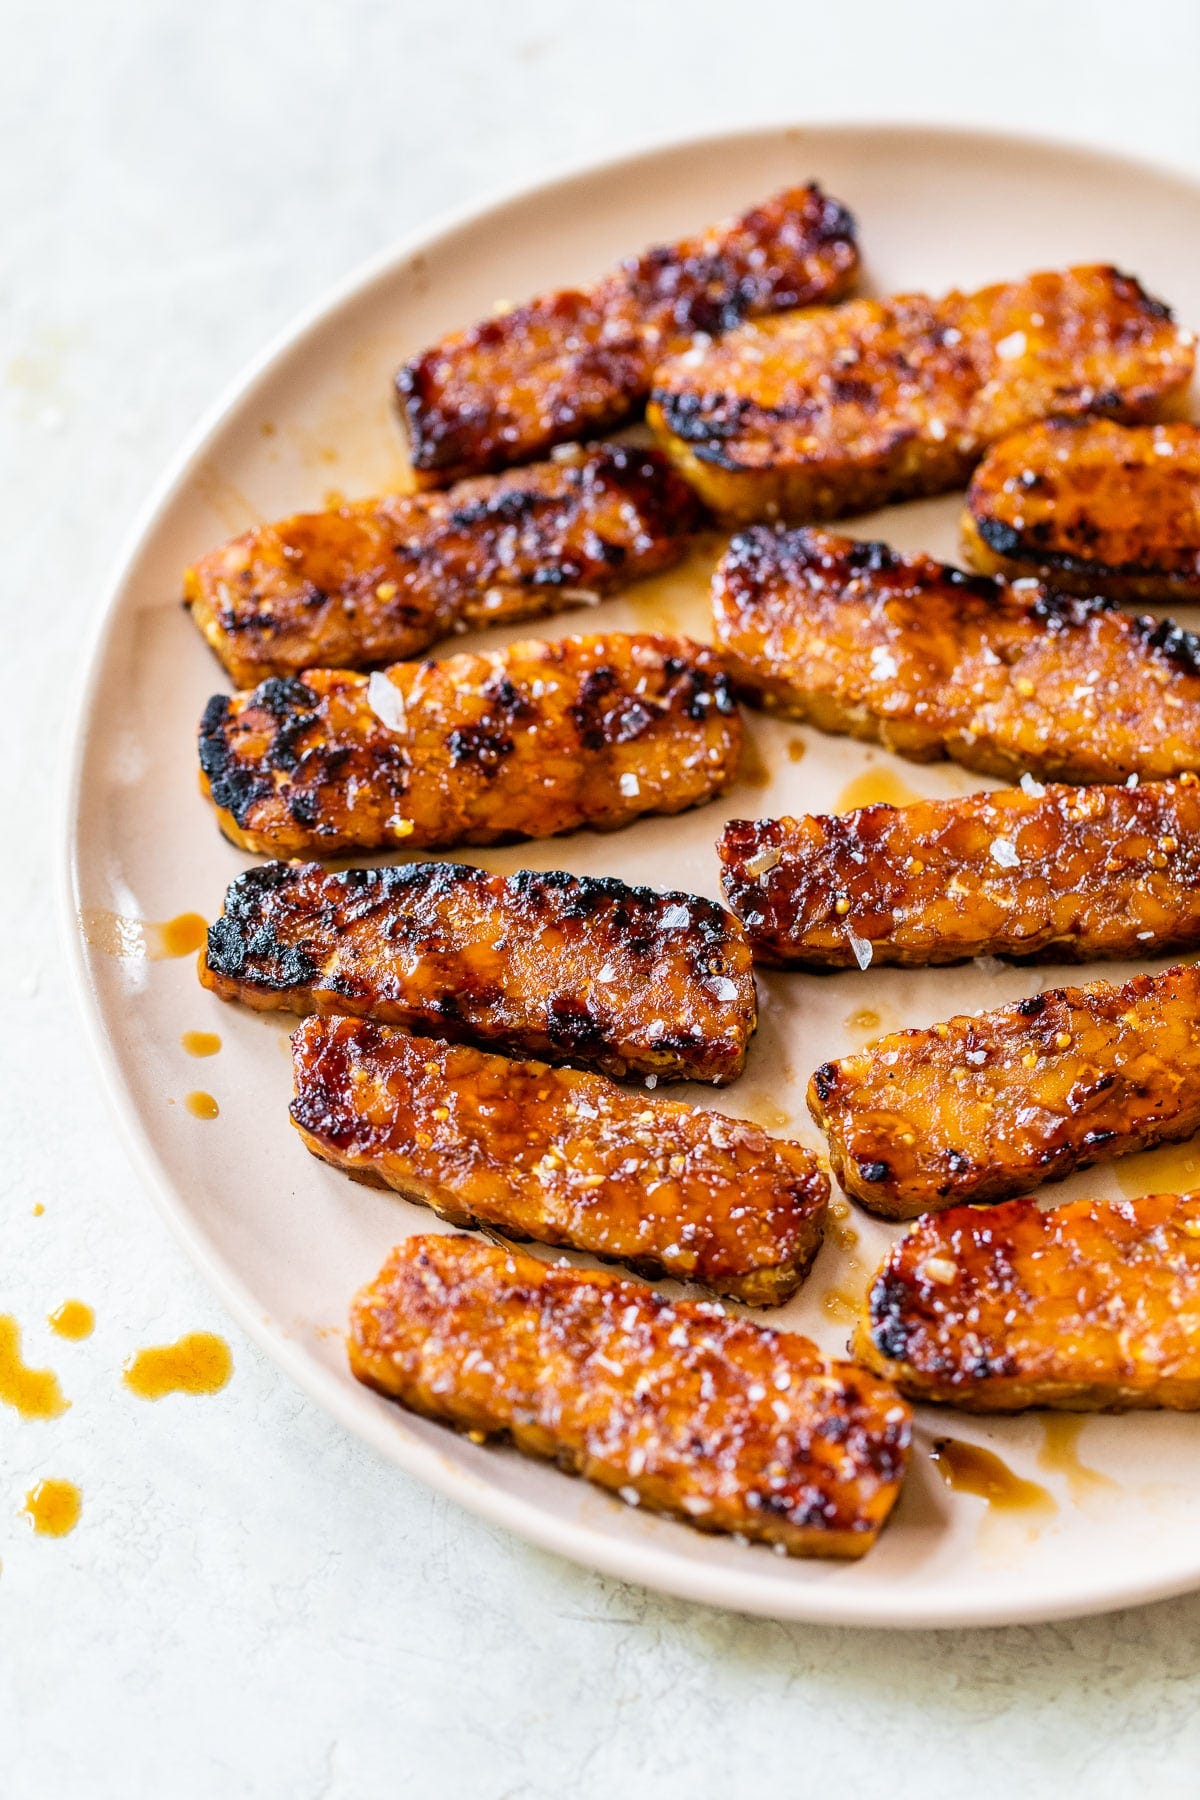 Grilled Tempeh - The Almond Eater